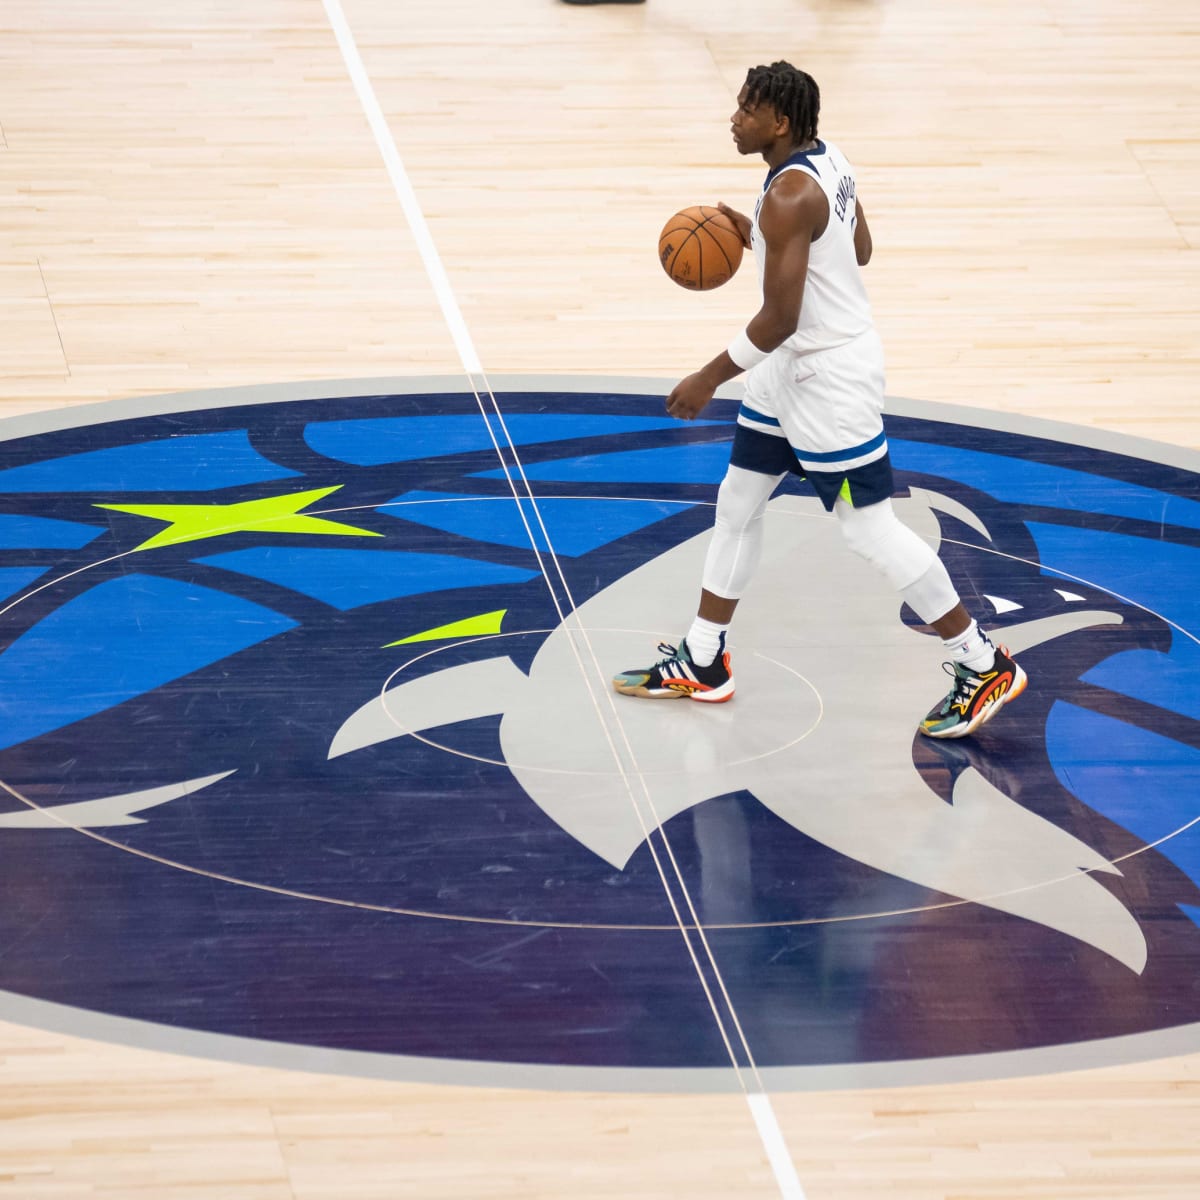 Timberwolves vs Grizzlies: Anthony Edwards inspires Minnesota to